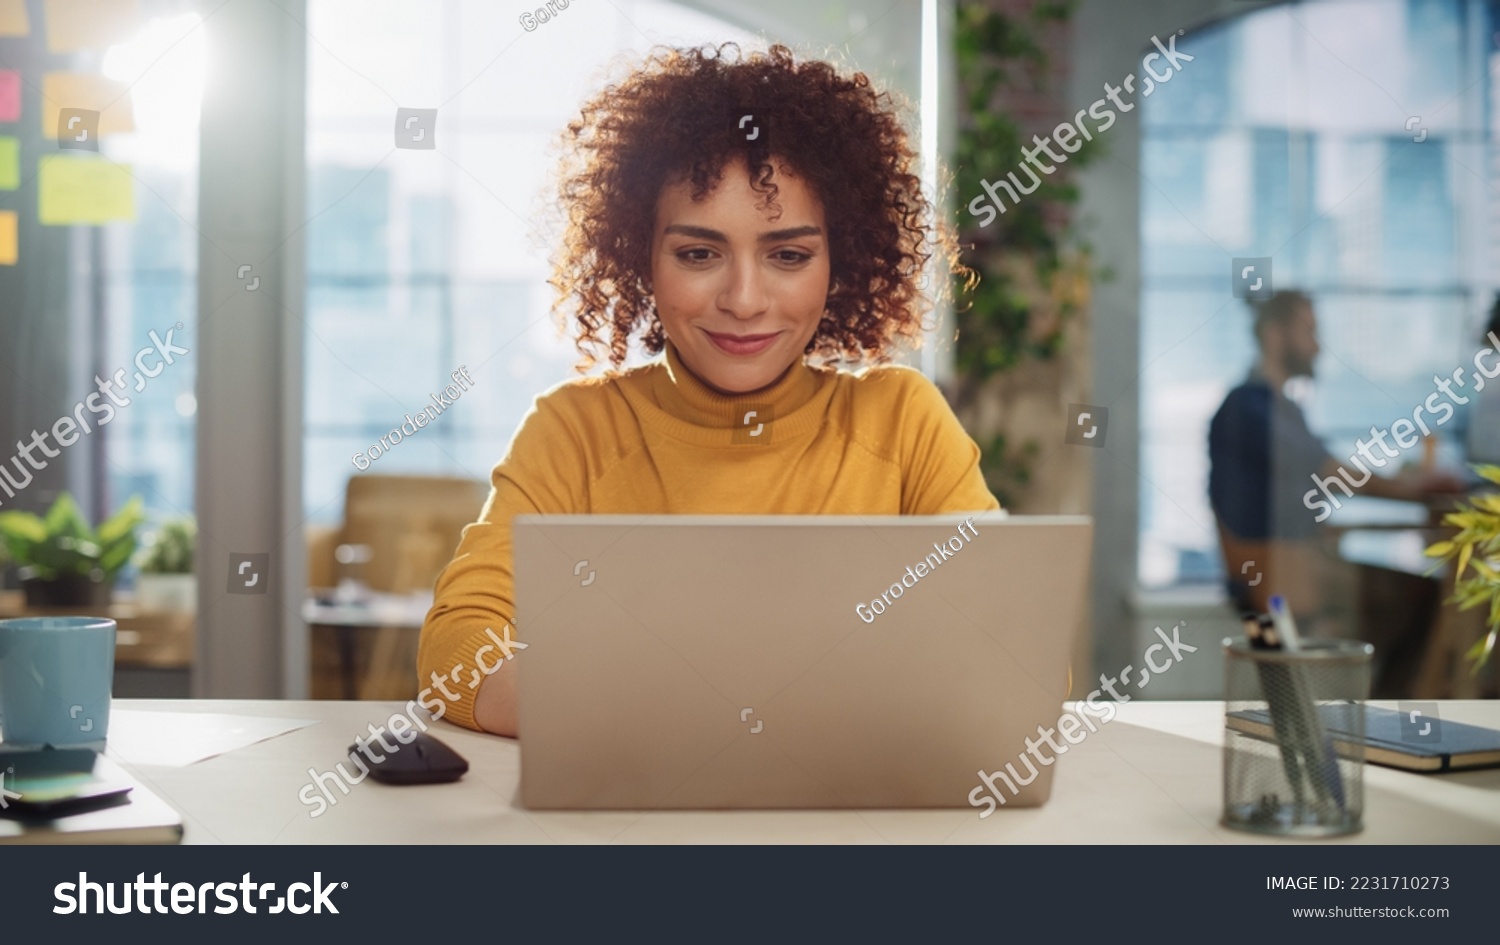 Beautiful Middle Eastern Manager Sitting at a Desk in Creative Office. Young Stylish Female with Curly Hair Using Laptop Computer in Marketing Agency. Colleagues Working in the Background #2231710273